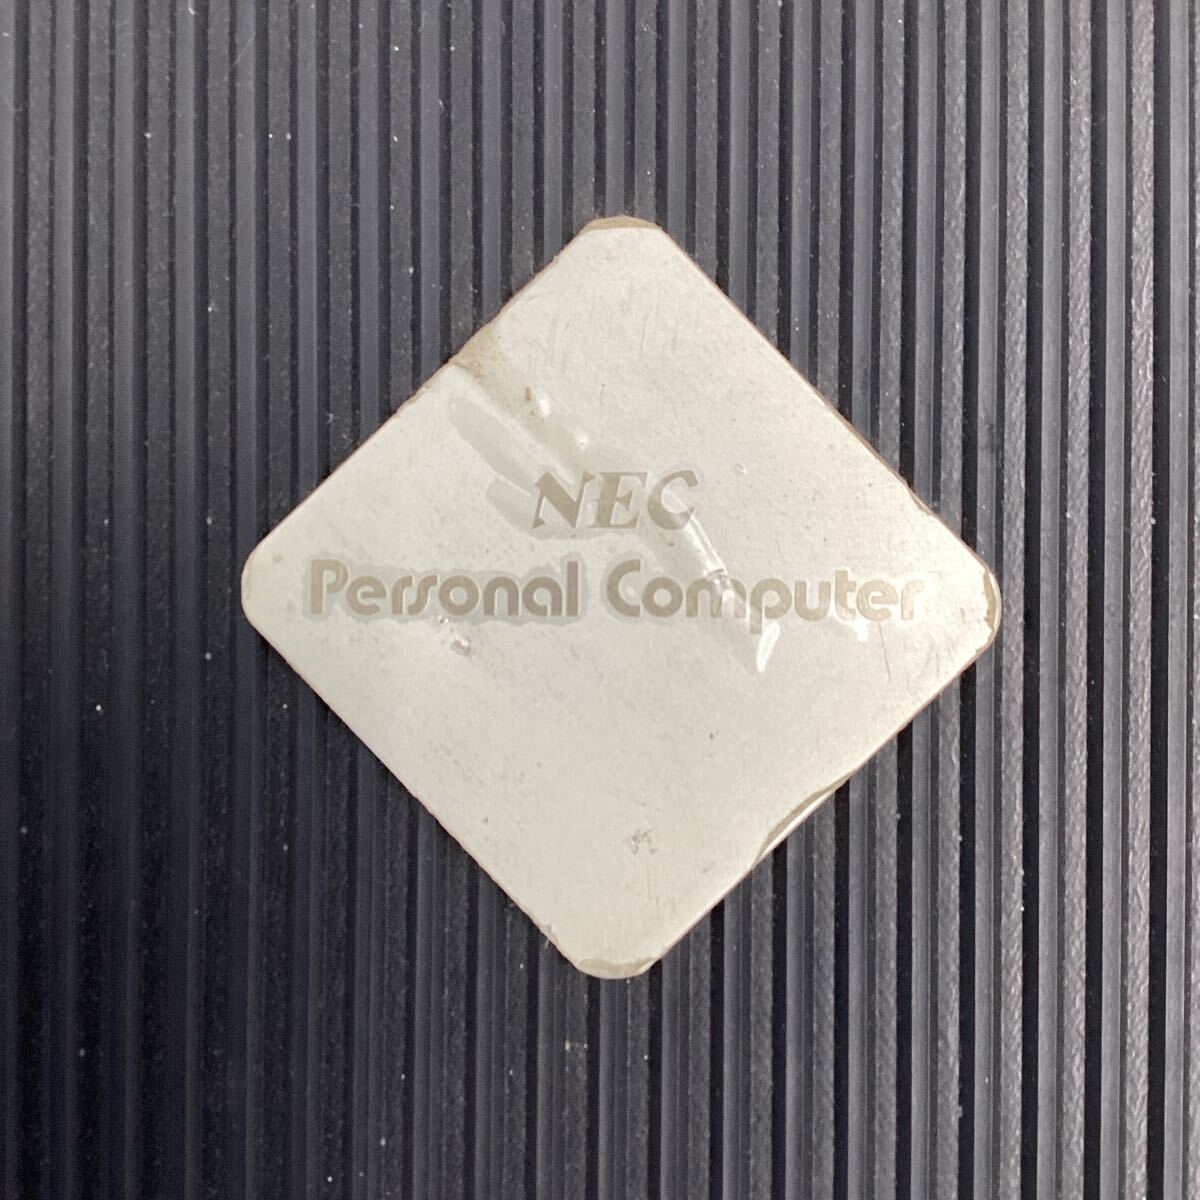 k5350 NEC personal computer case PC-98 for? Personal Computer bag case black storage box carrying keep .. that time thing retro key attaching used 